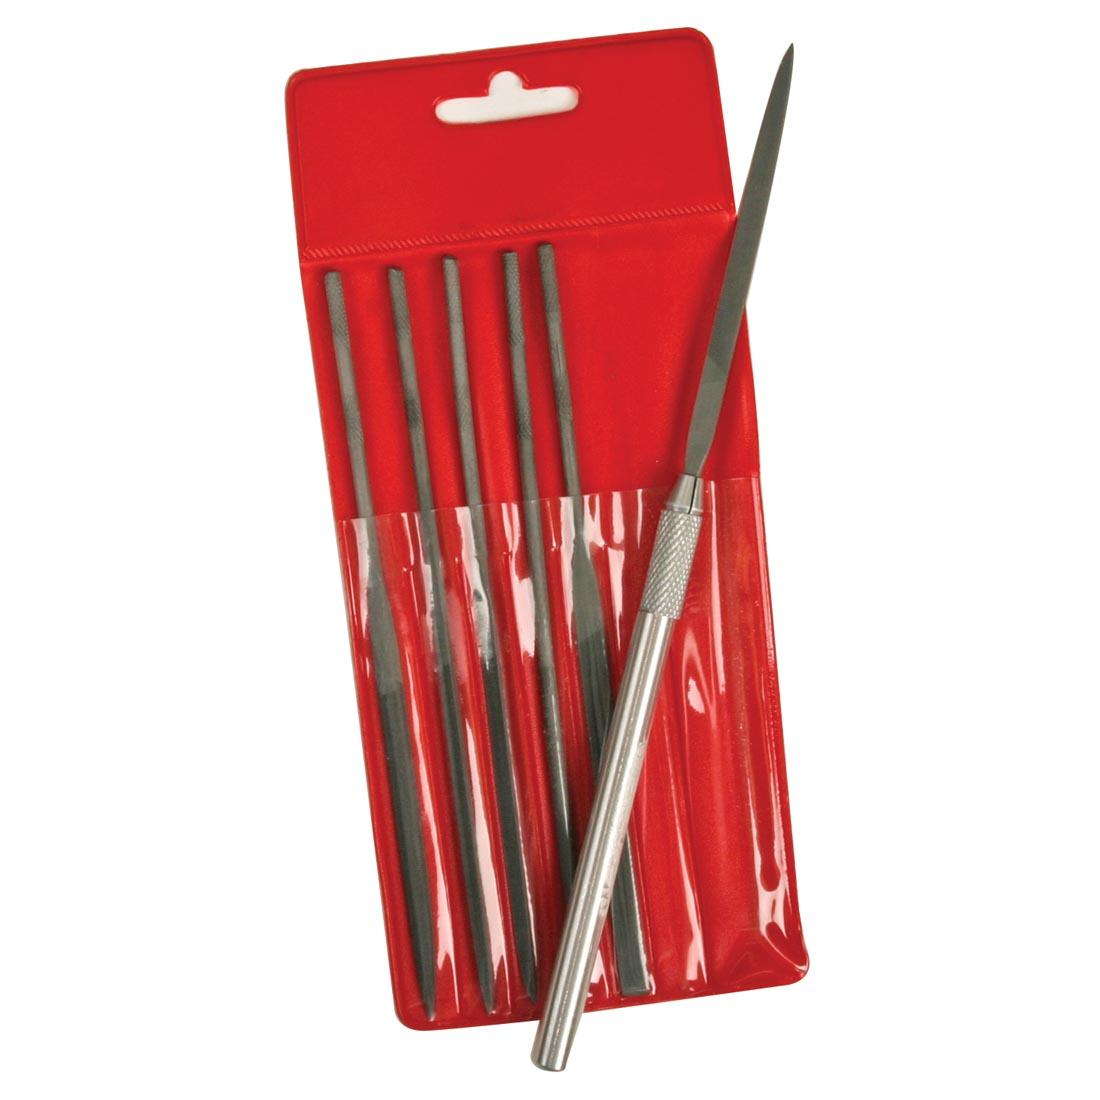 Needle File Set in a red pouch